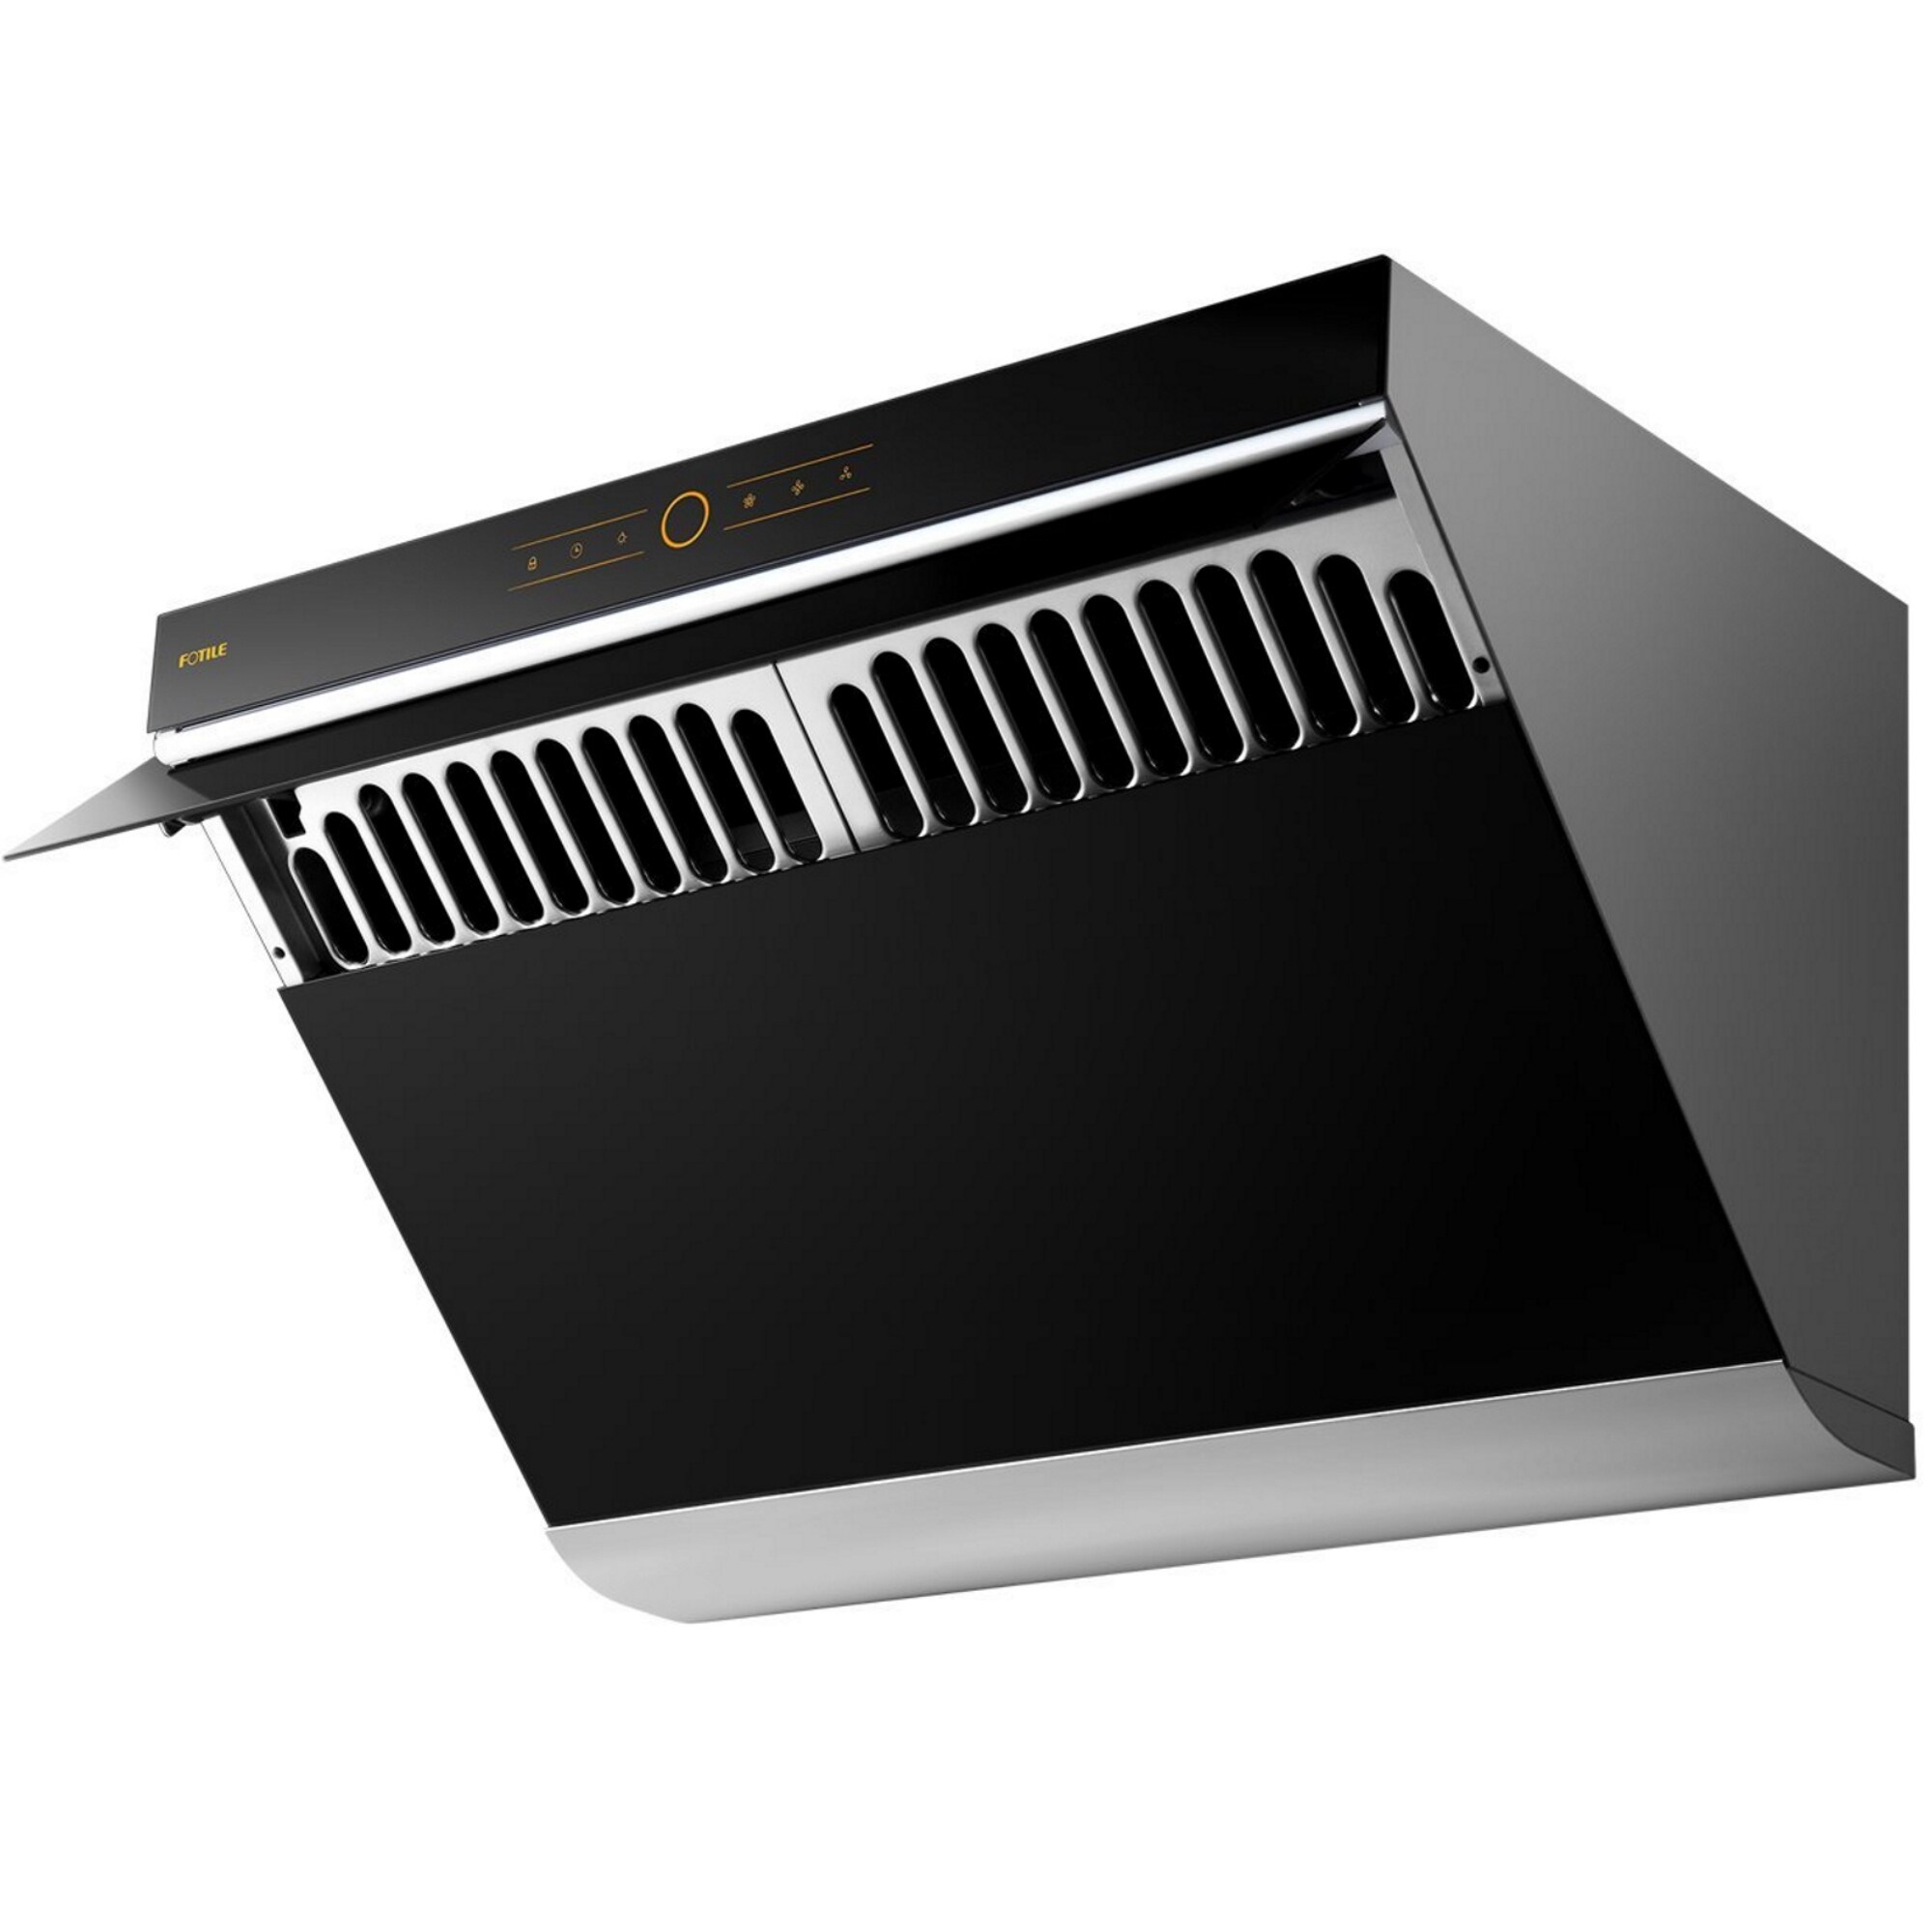 Cosmo 30 in. Ducted Wall Mount Range Hood in Stainless Steel with Soft  Touch Controls, Permanent Filters and LED Lights